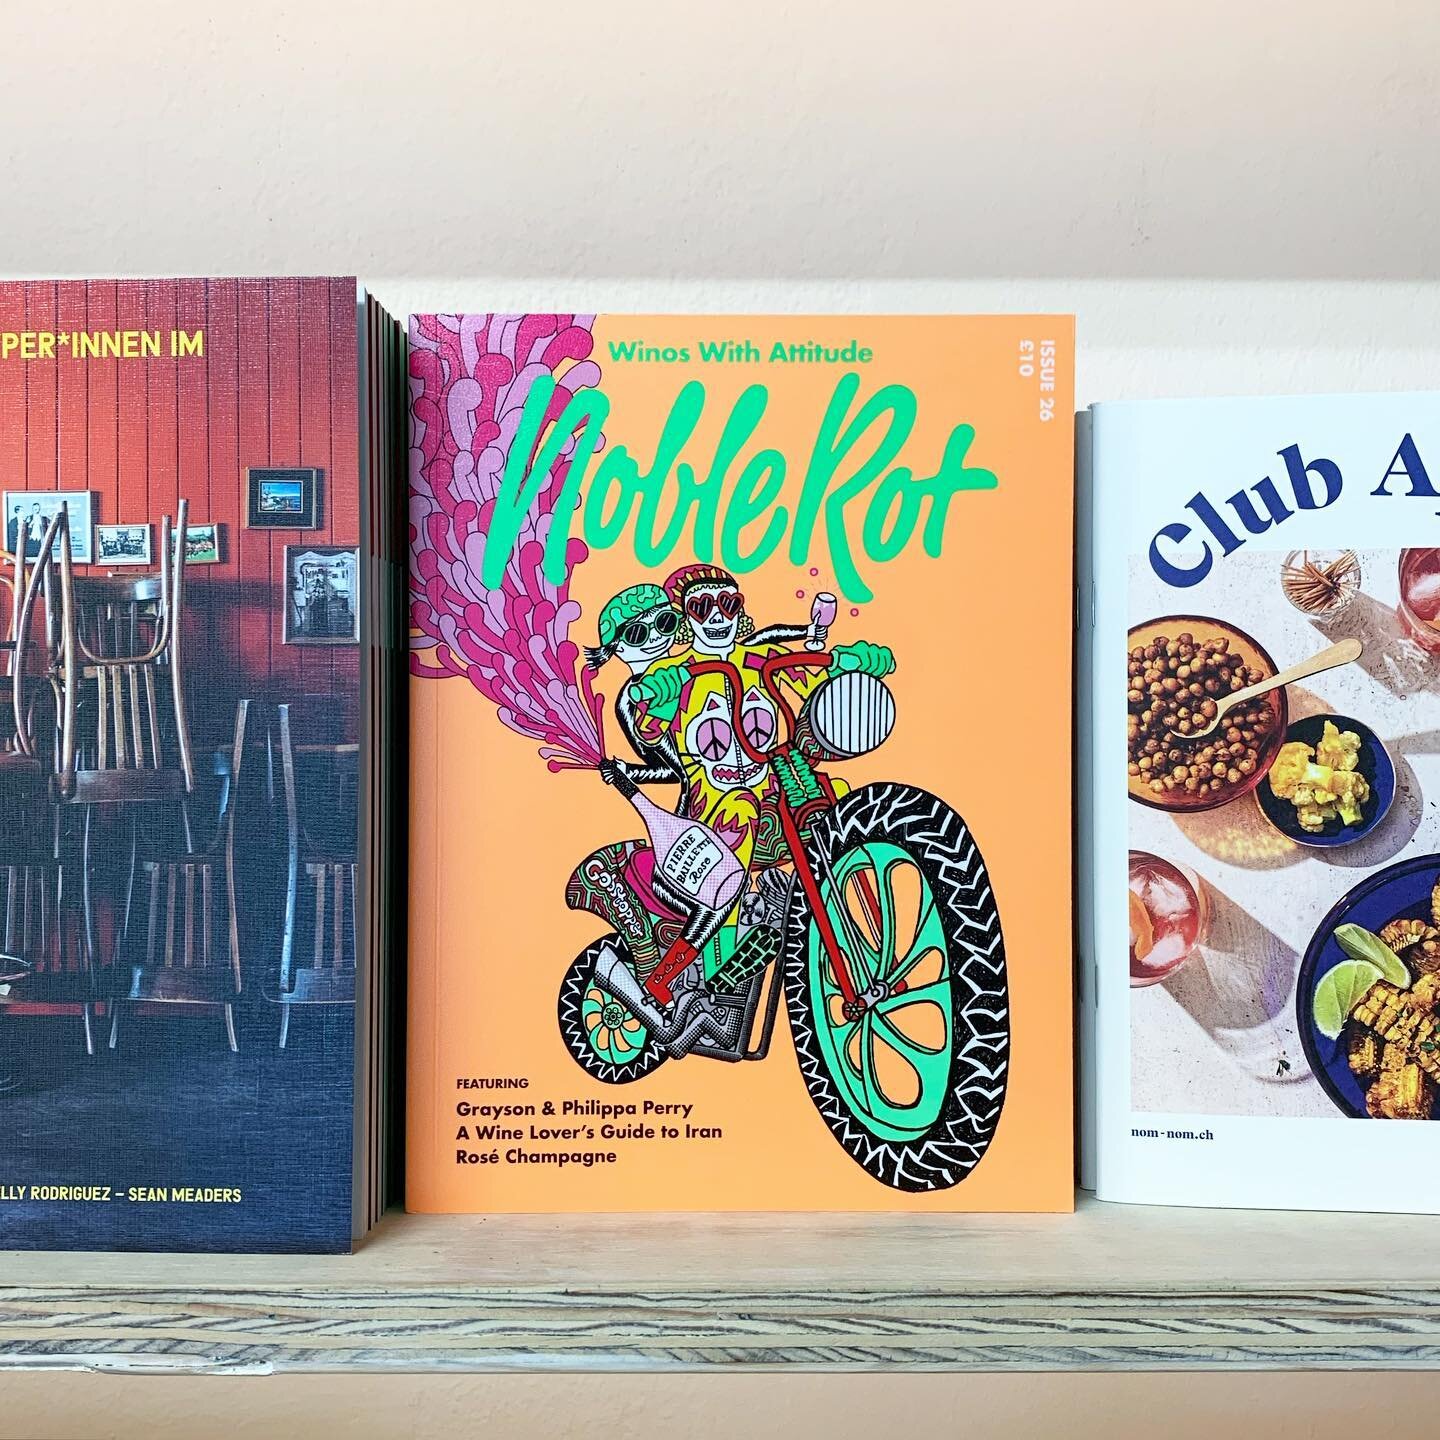 Meet the Noble Rot - the magazine for wine lovers 🍷 
-
@noblerotmag 
-